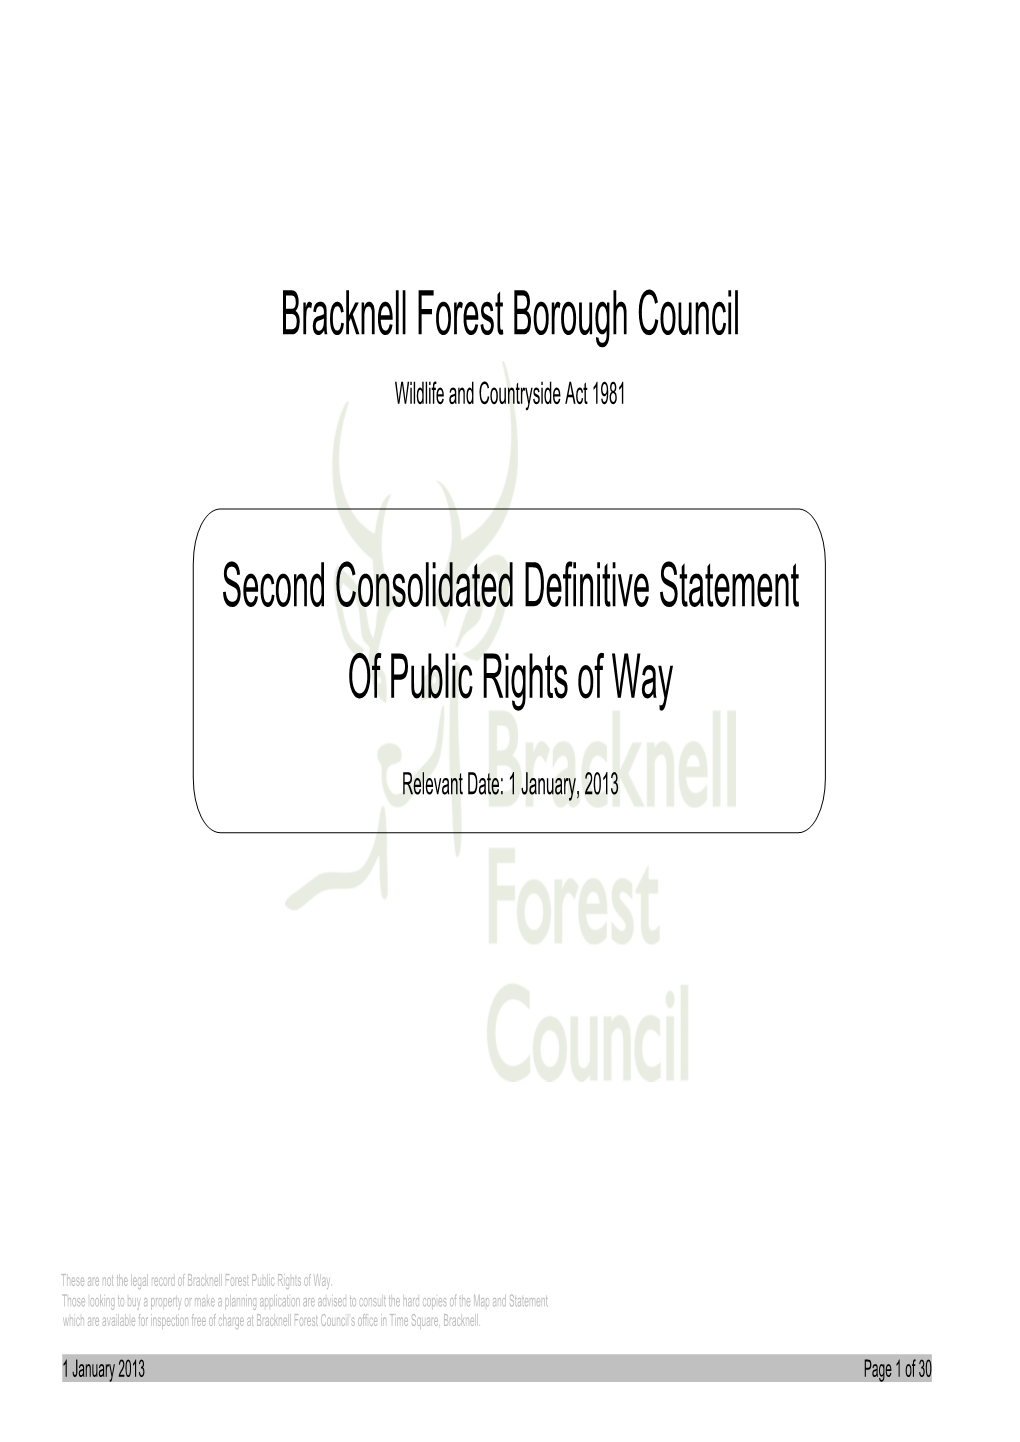 BFBC Second Consolidated Definitive Statement of Public Rights Of